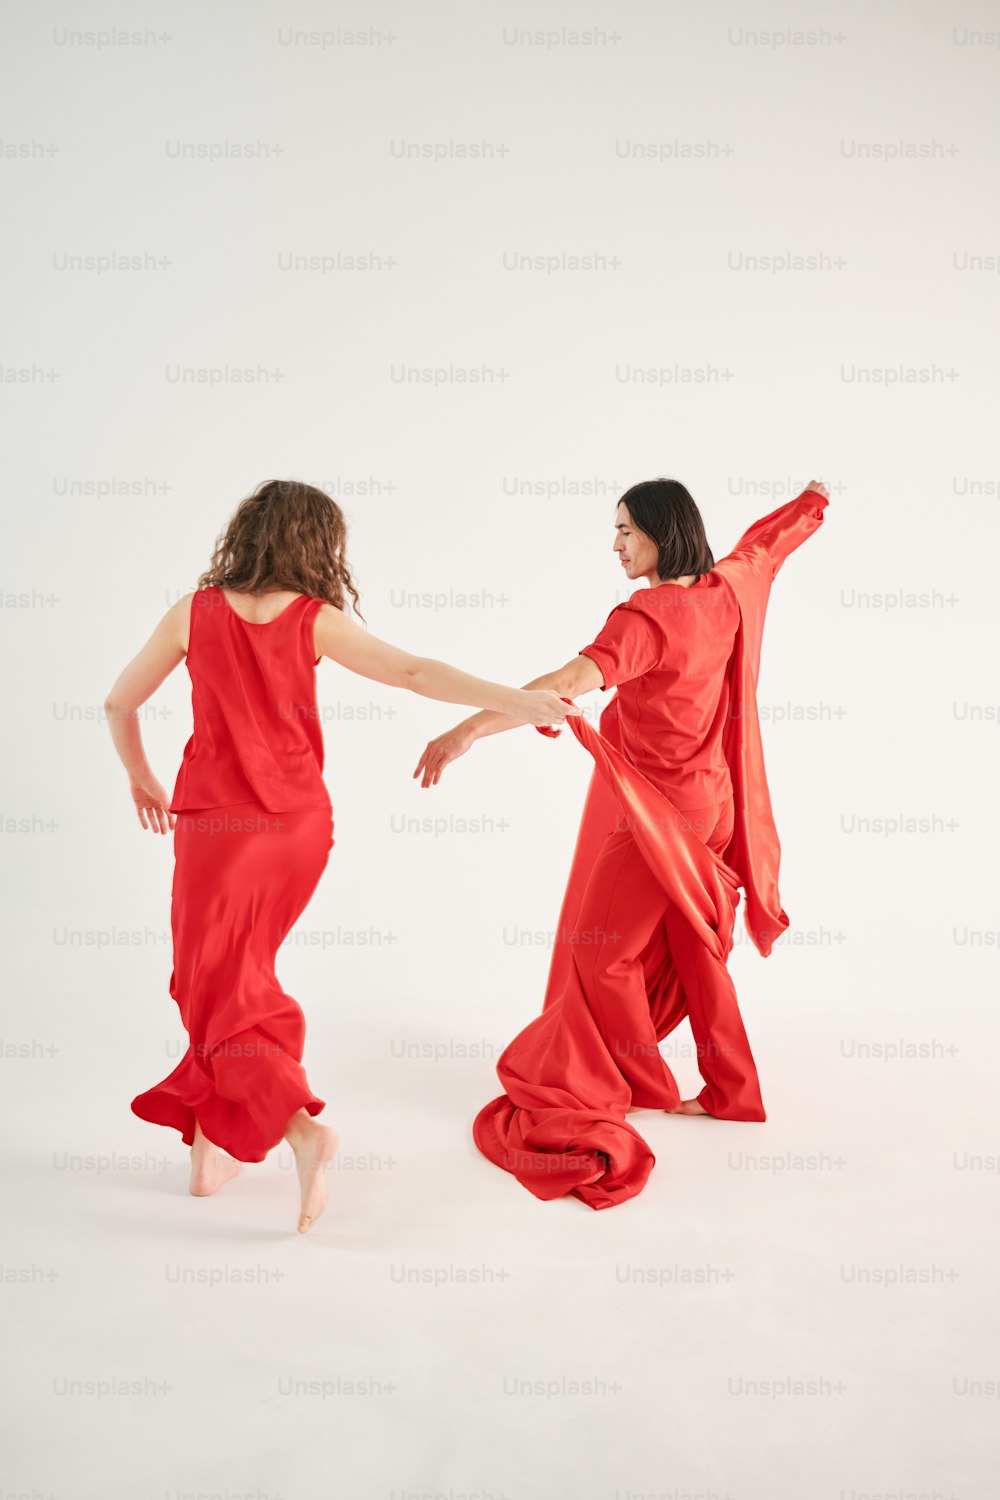 two women dressed in red dancing together